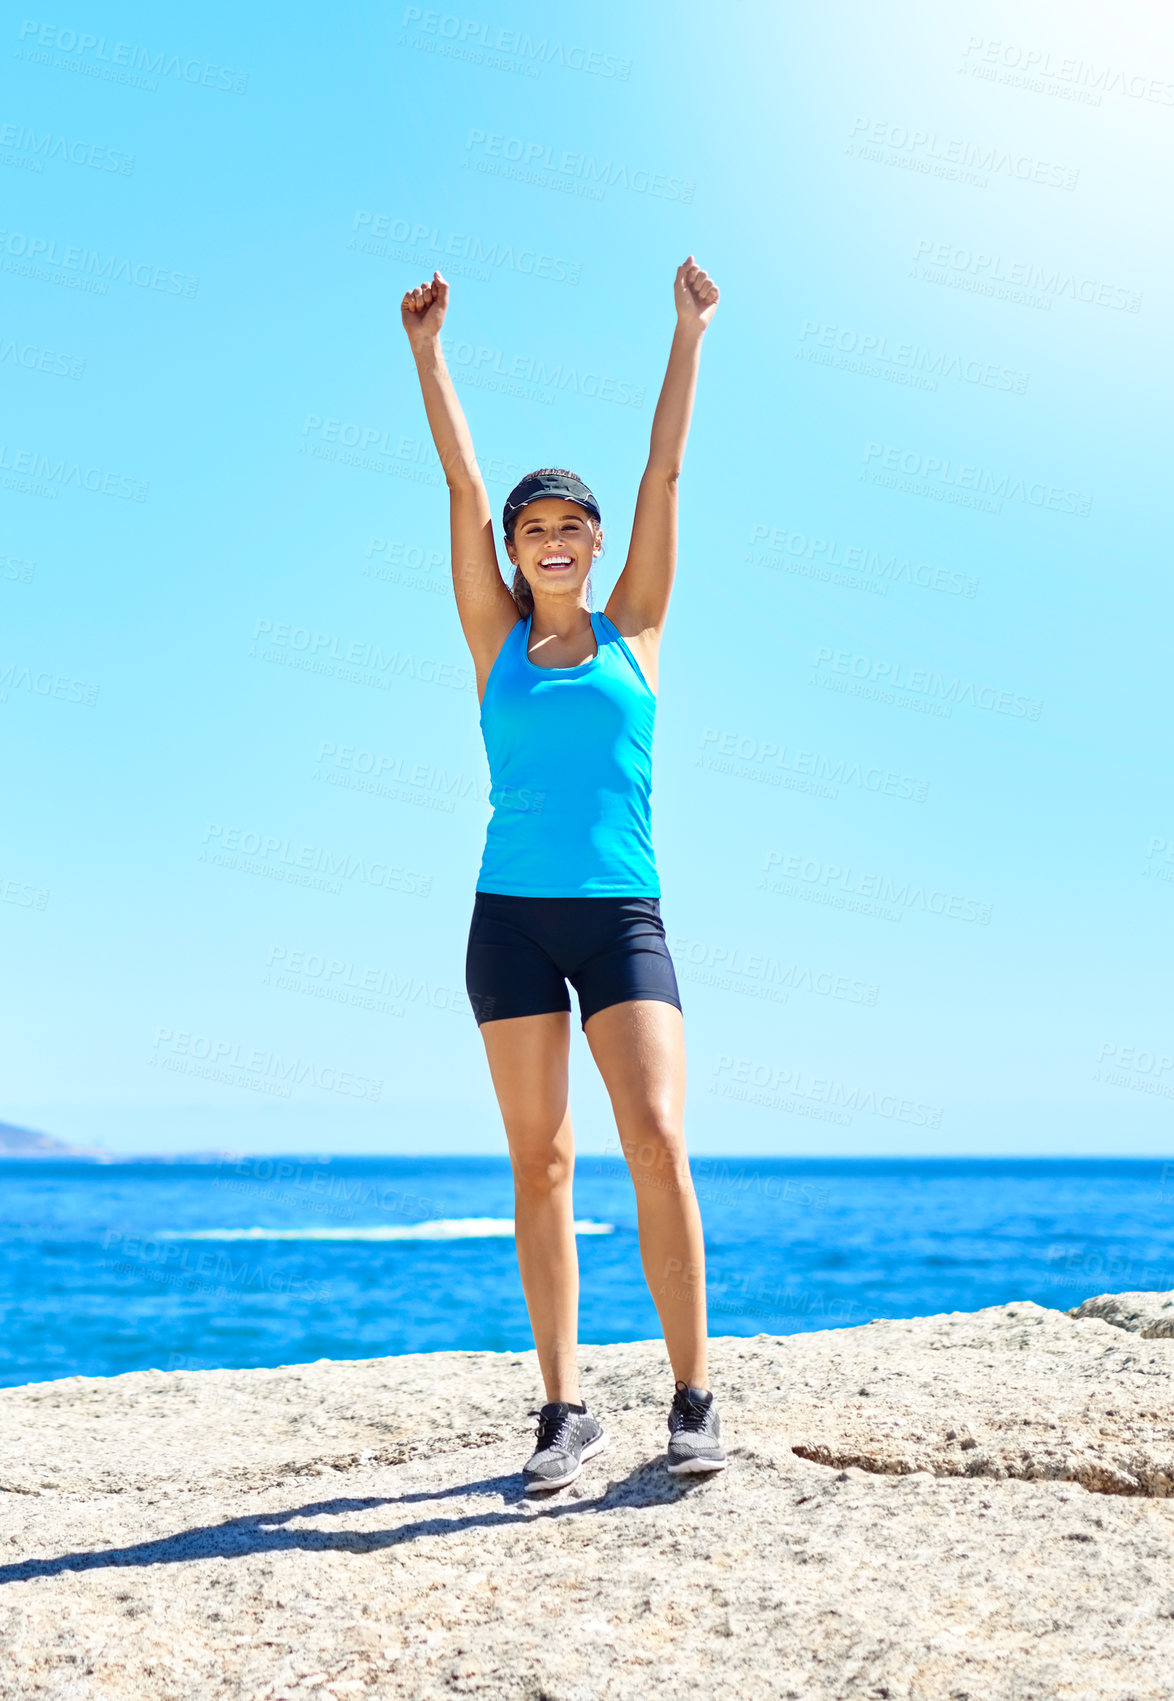 Buy stock photo Shot of a young woman celebrating her victory while out for a run